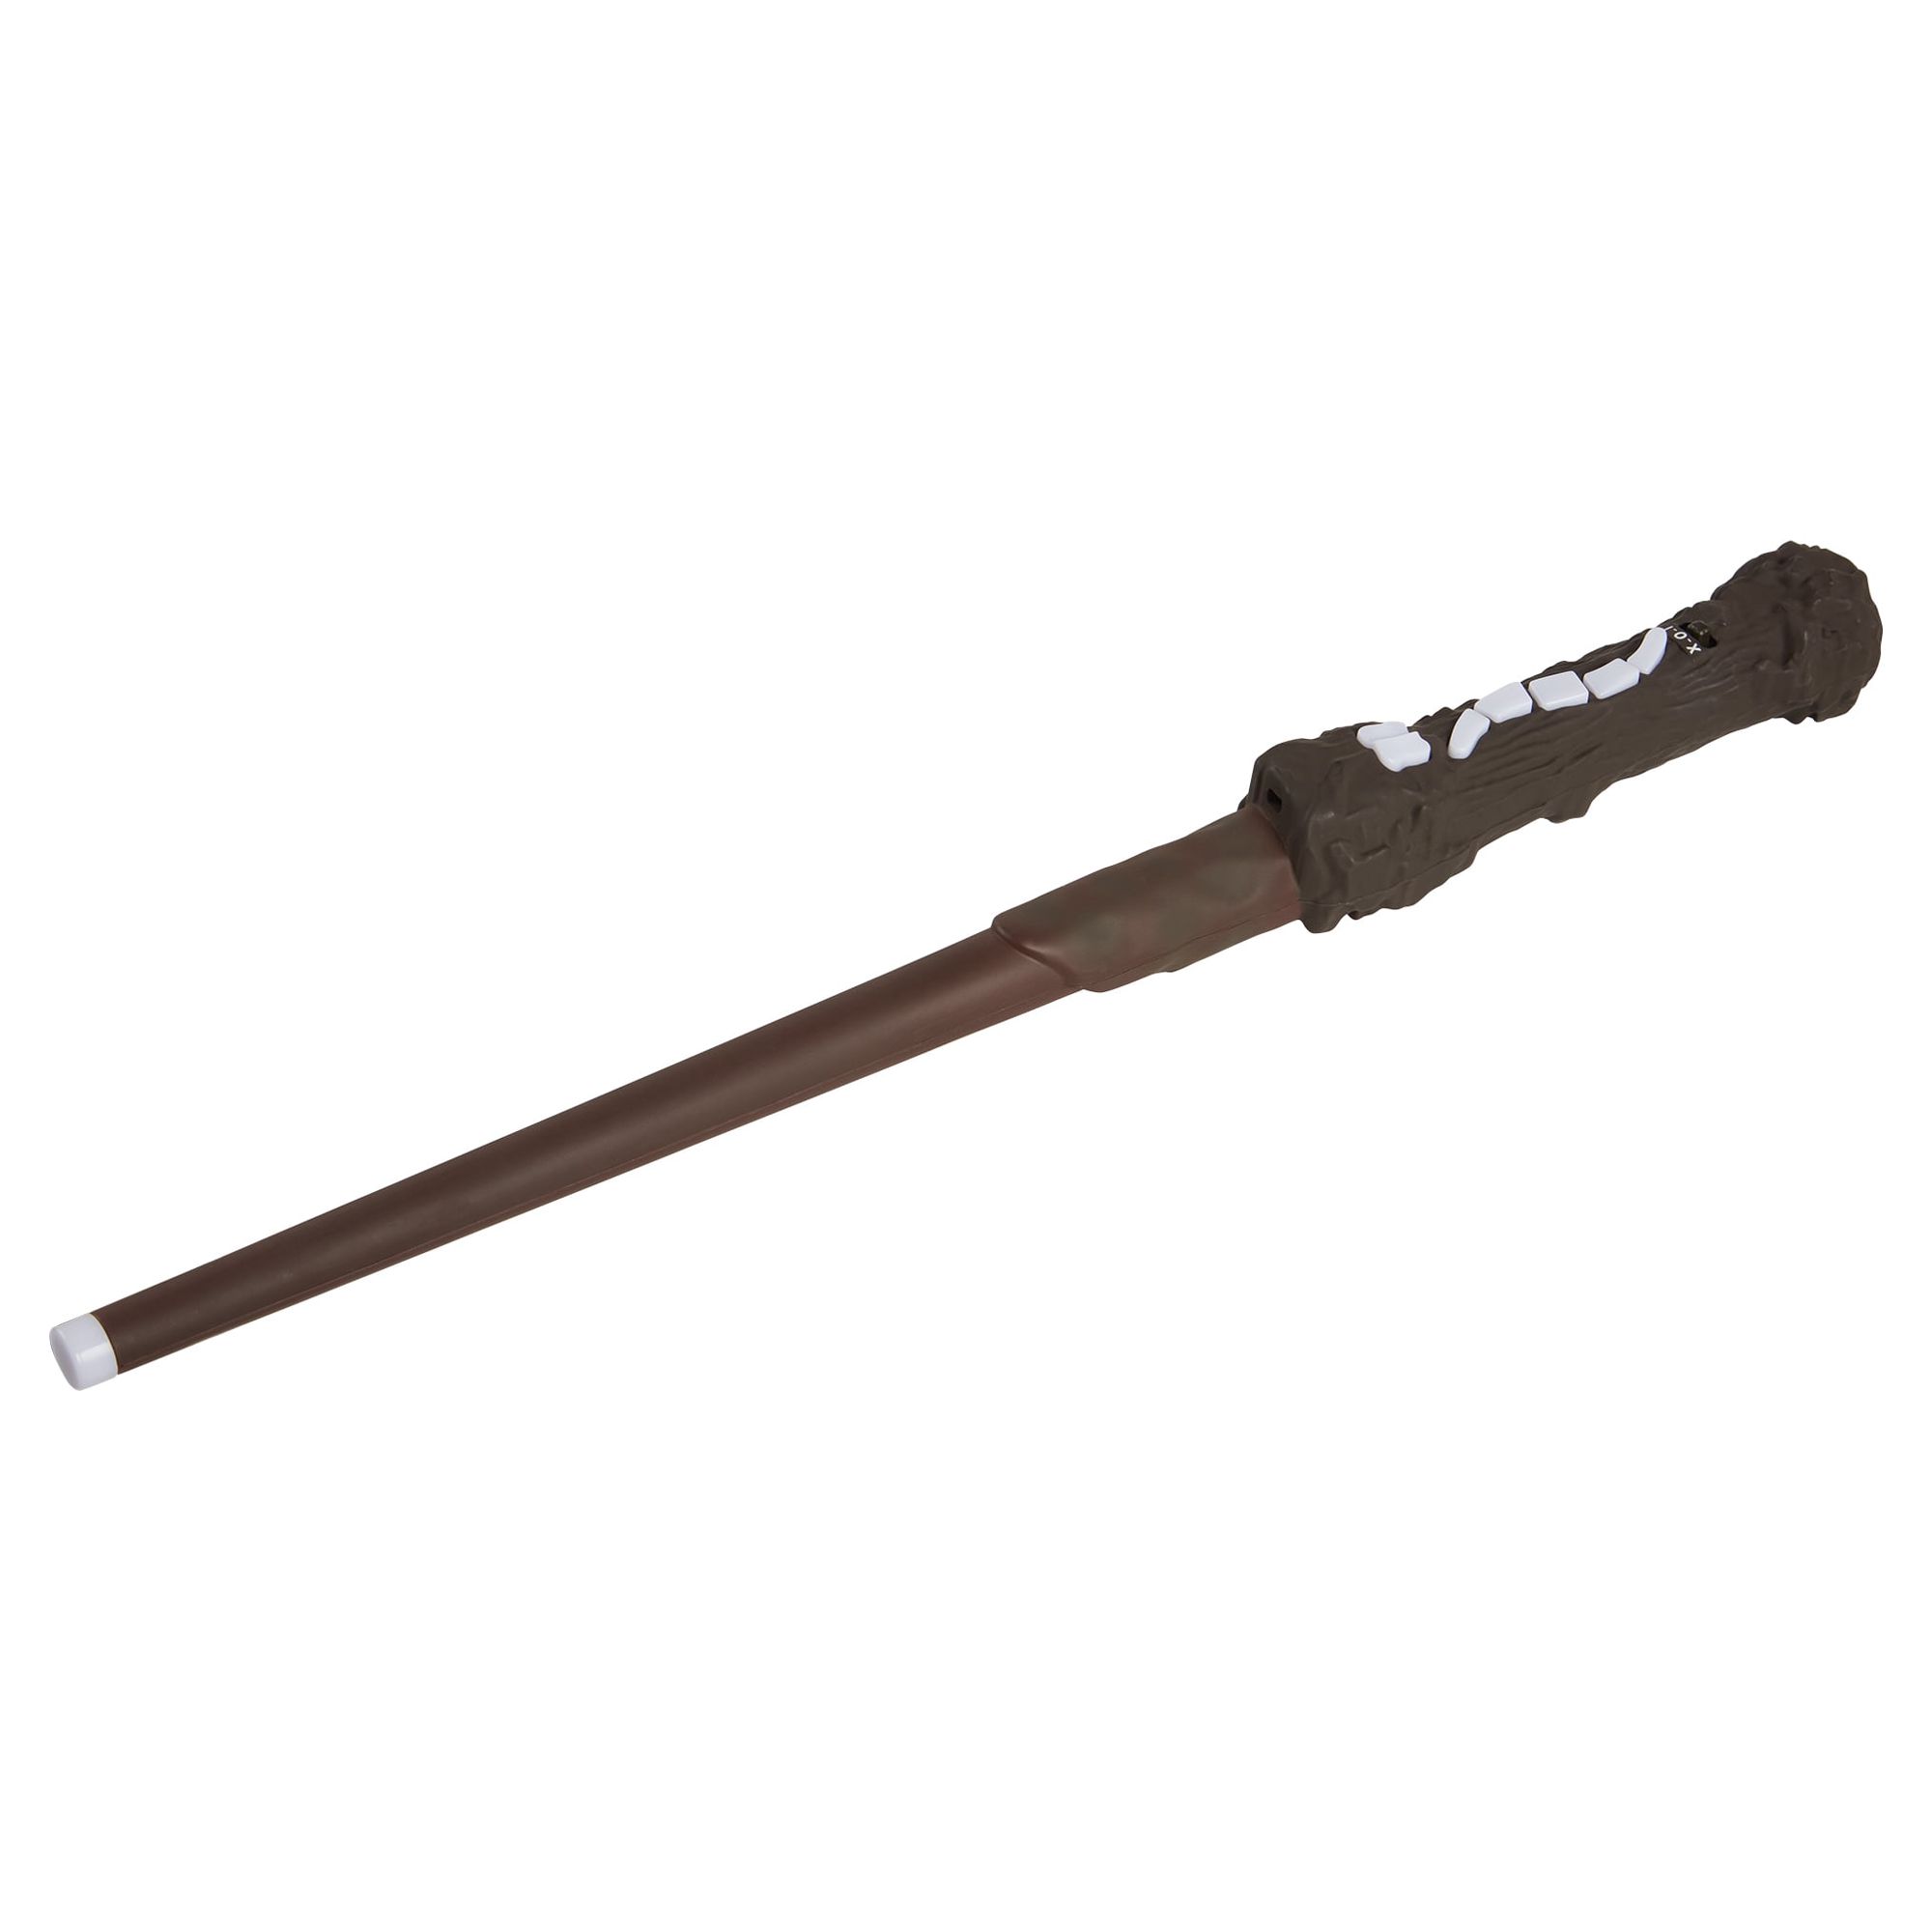 Harry Potter's Wand Interactive Wizard Training Wand - image 3 of 7